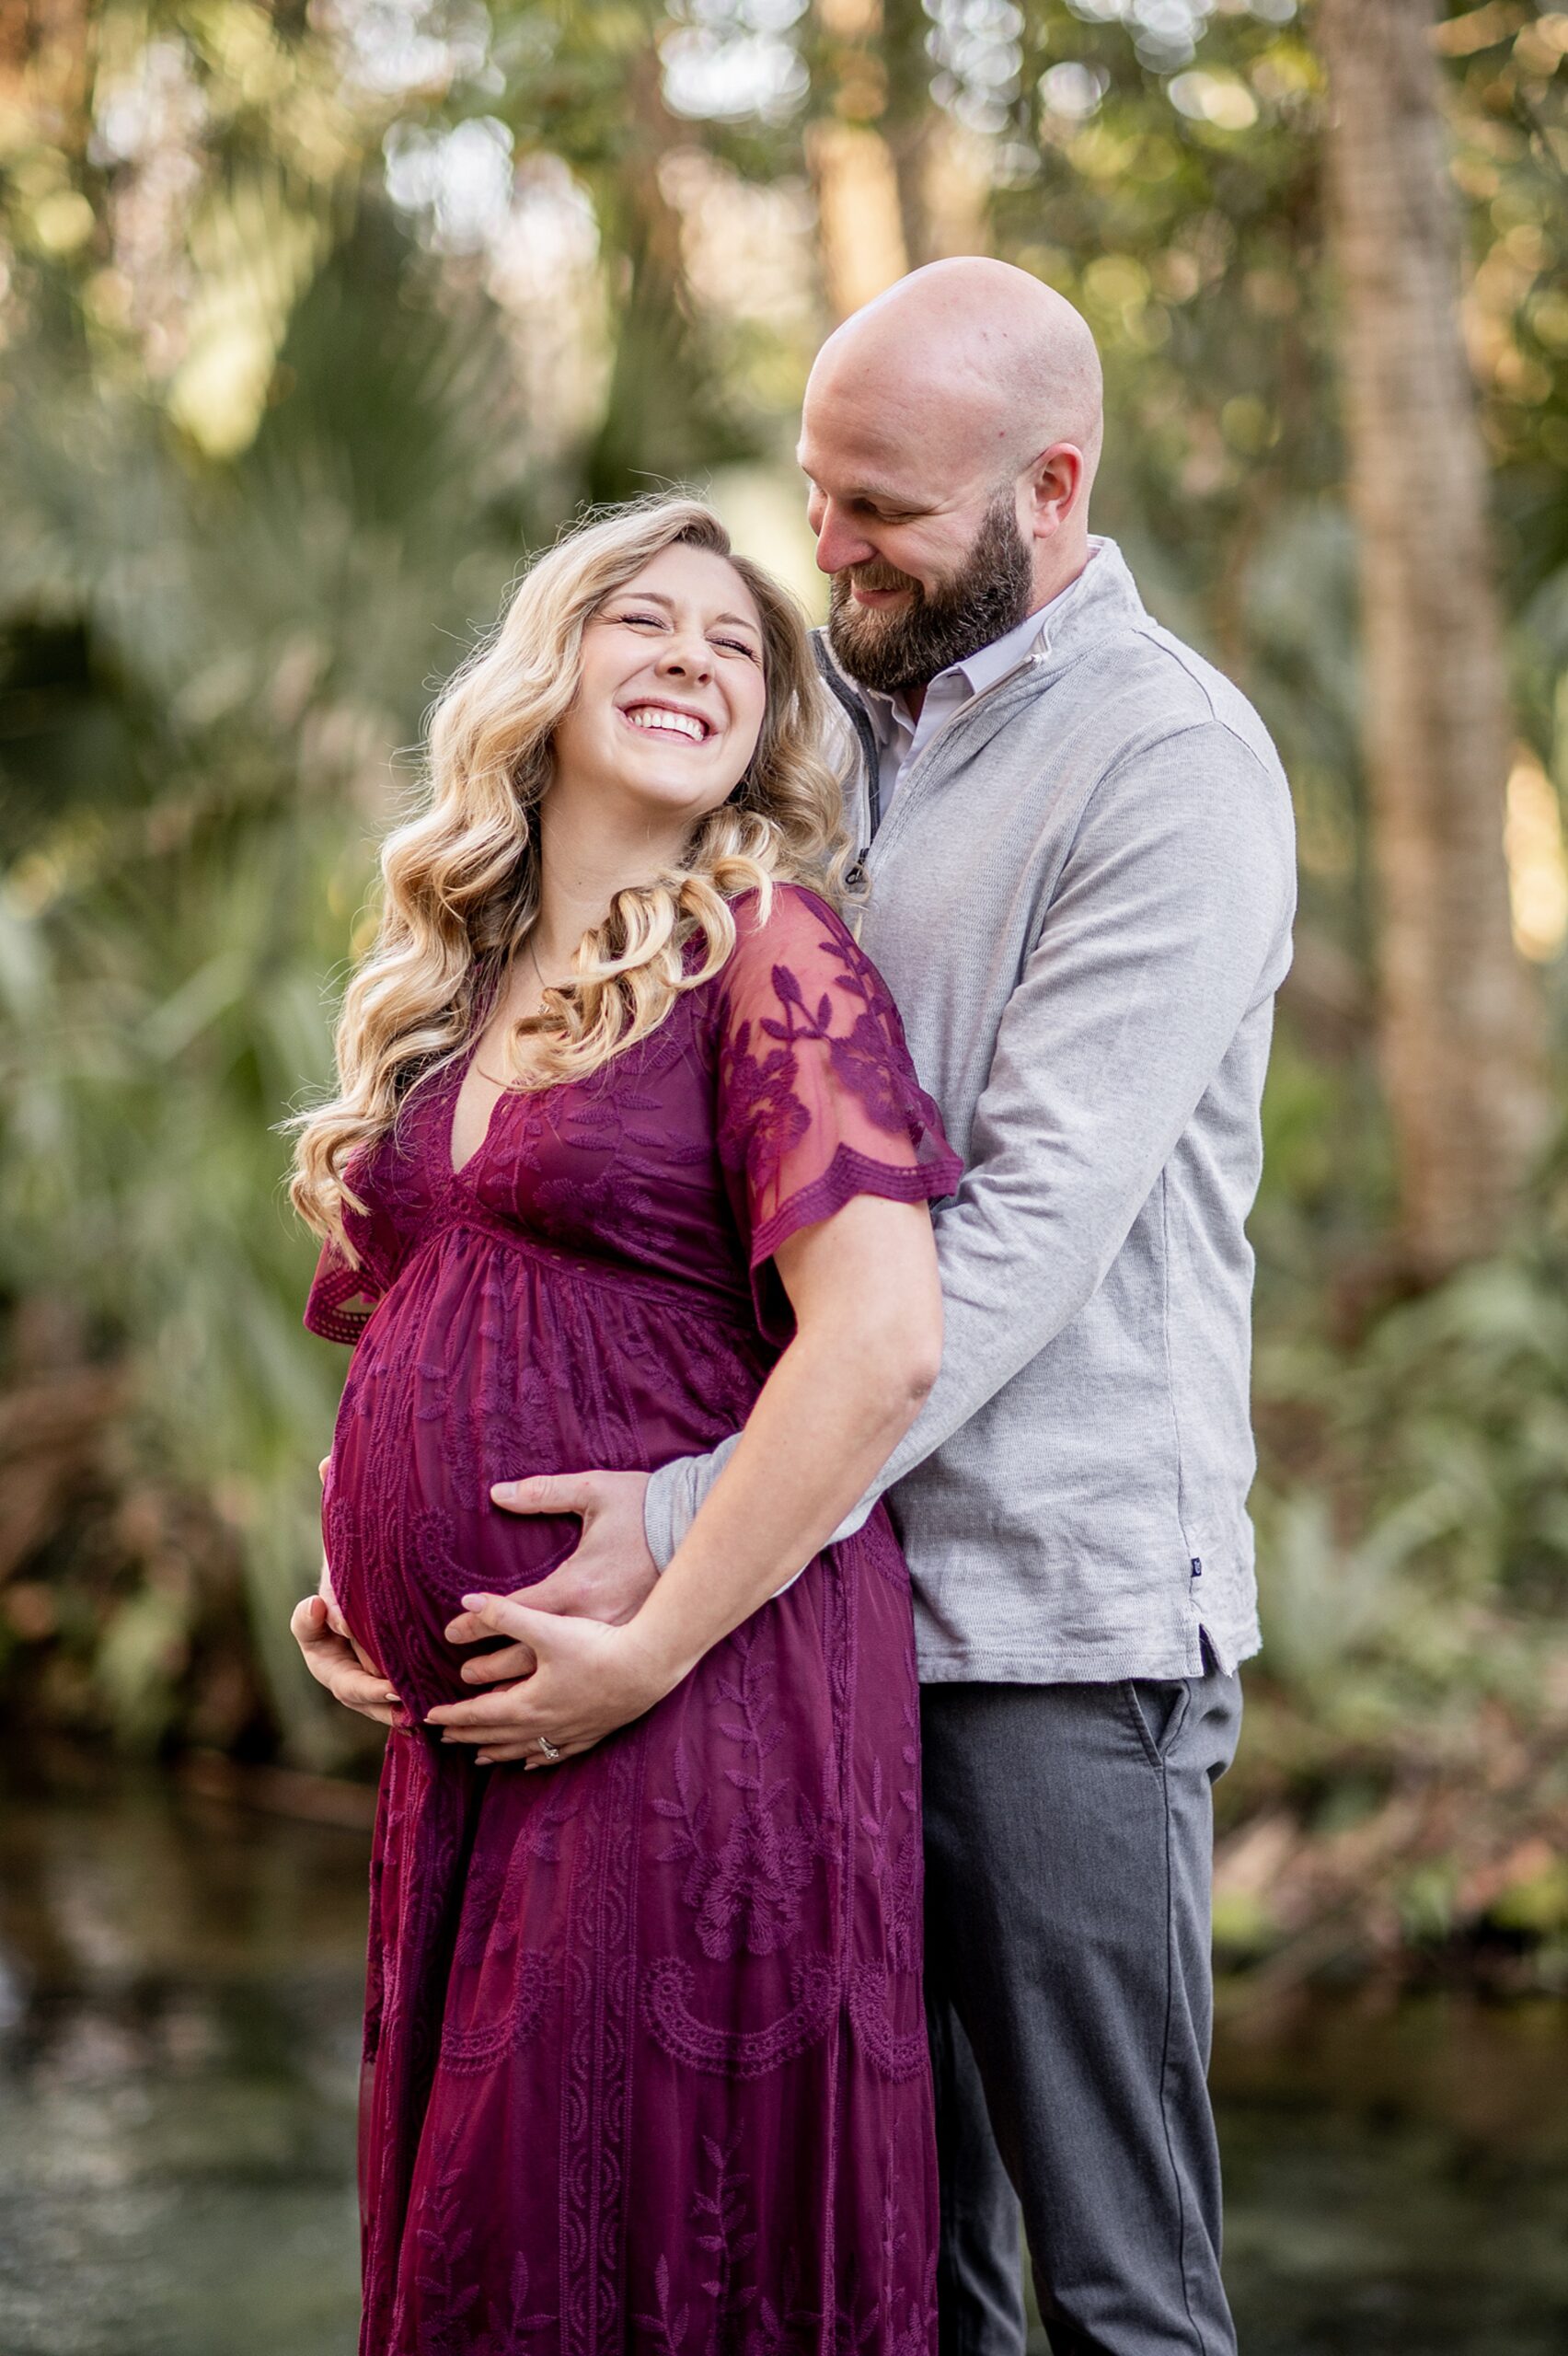 A mom to be is hugged from behind by her husband while wearing a purple lace maternity gown